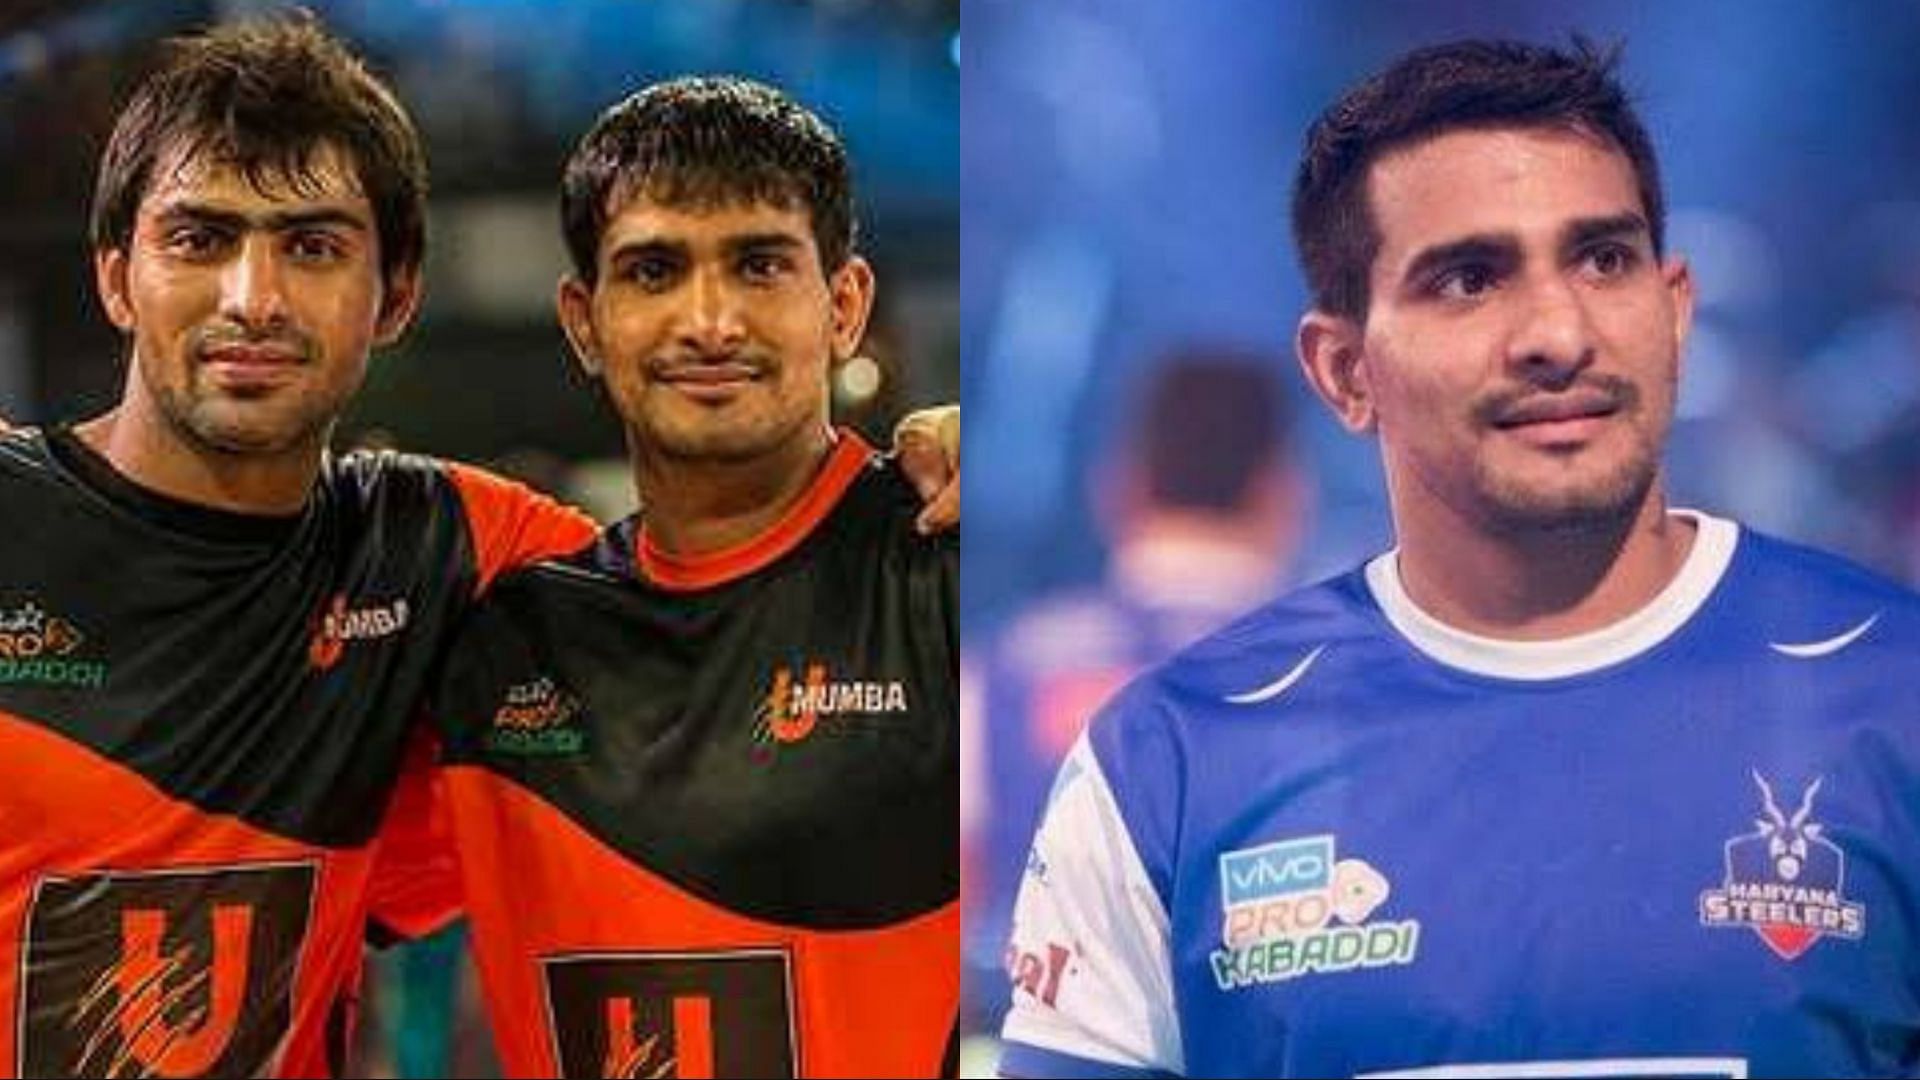 Surender Nada played for U Mumba in PKL Season 1 and is playing for Haryana Steelers this year